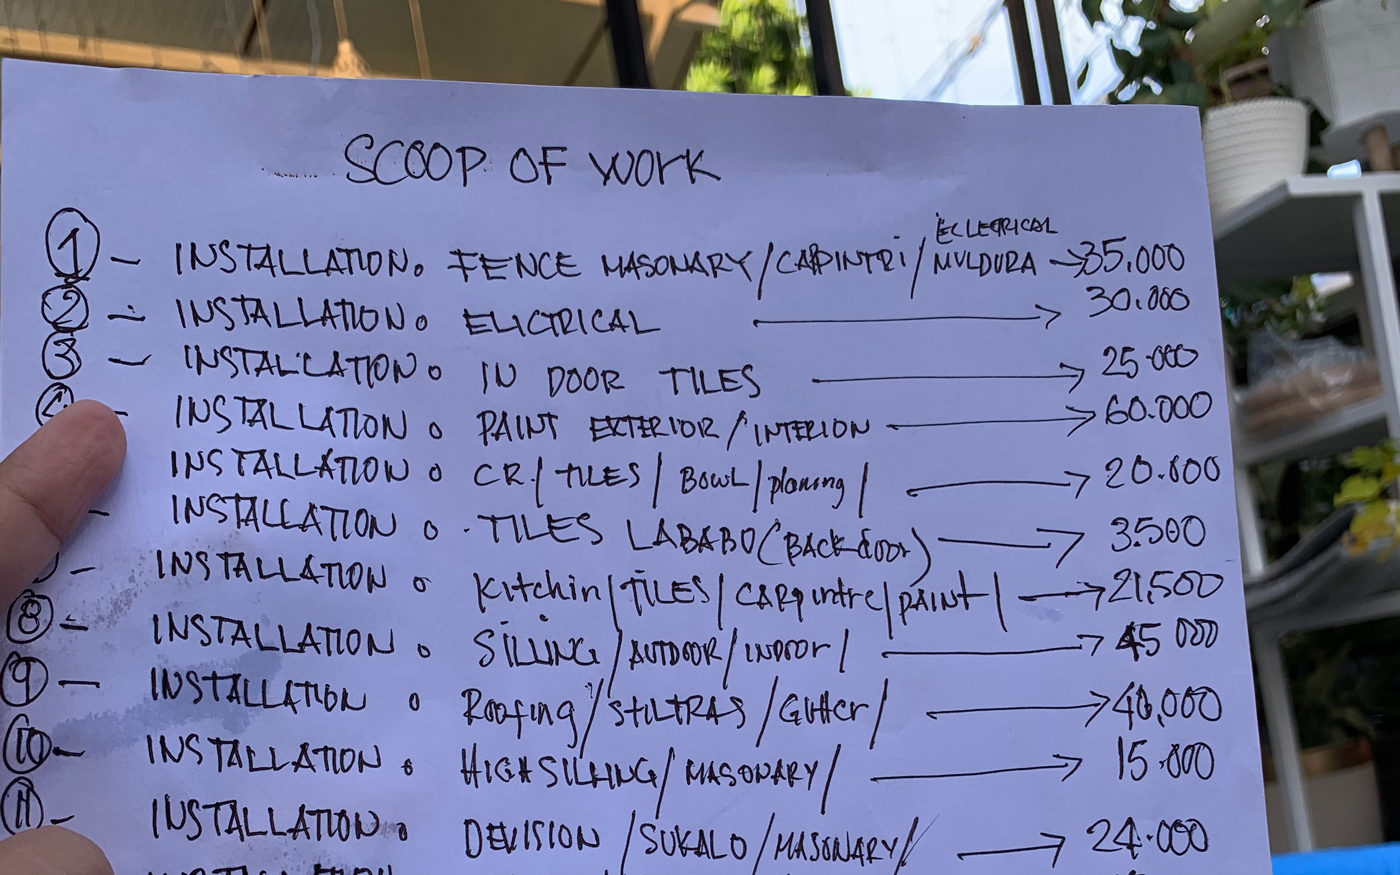 Scope of work presented by a contractor